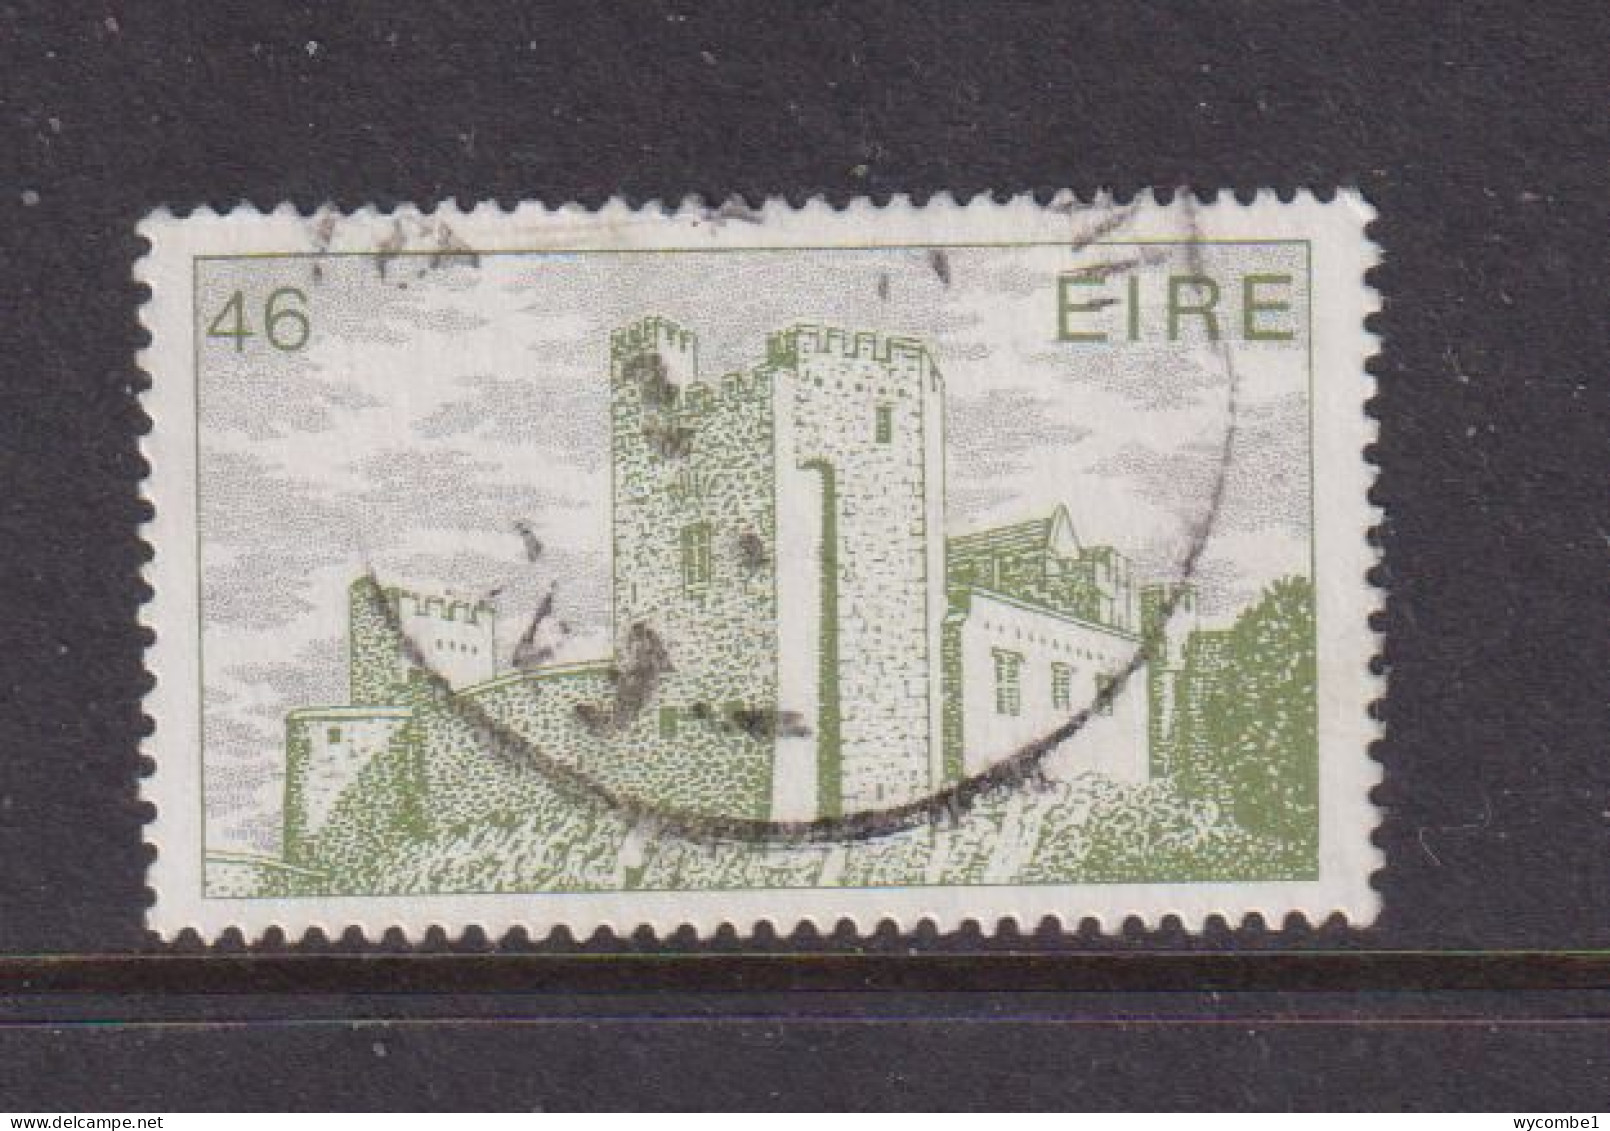 IRELAND - 1963  Architecture Definitive  46p Used As Scan - Gebraucht